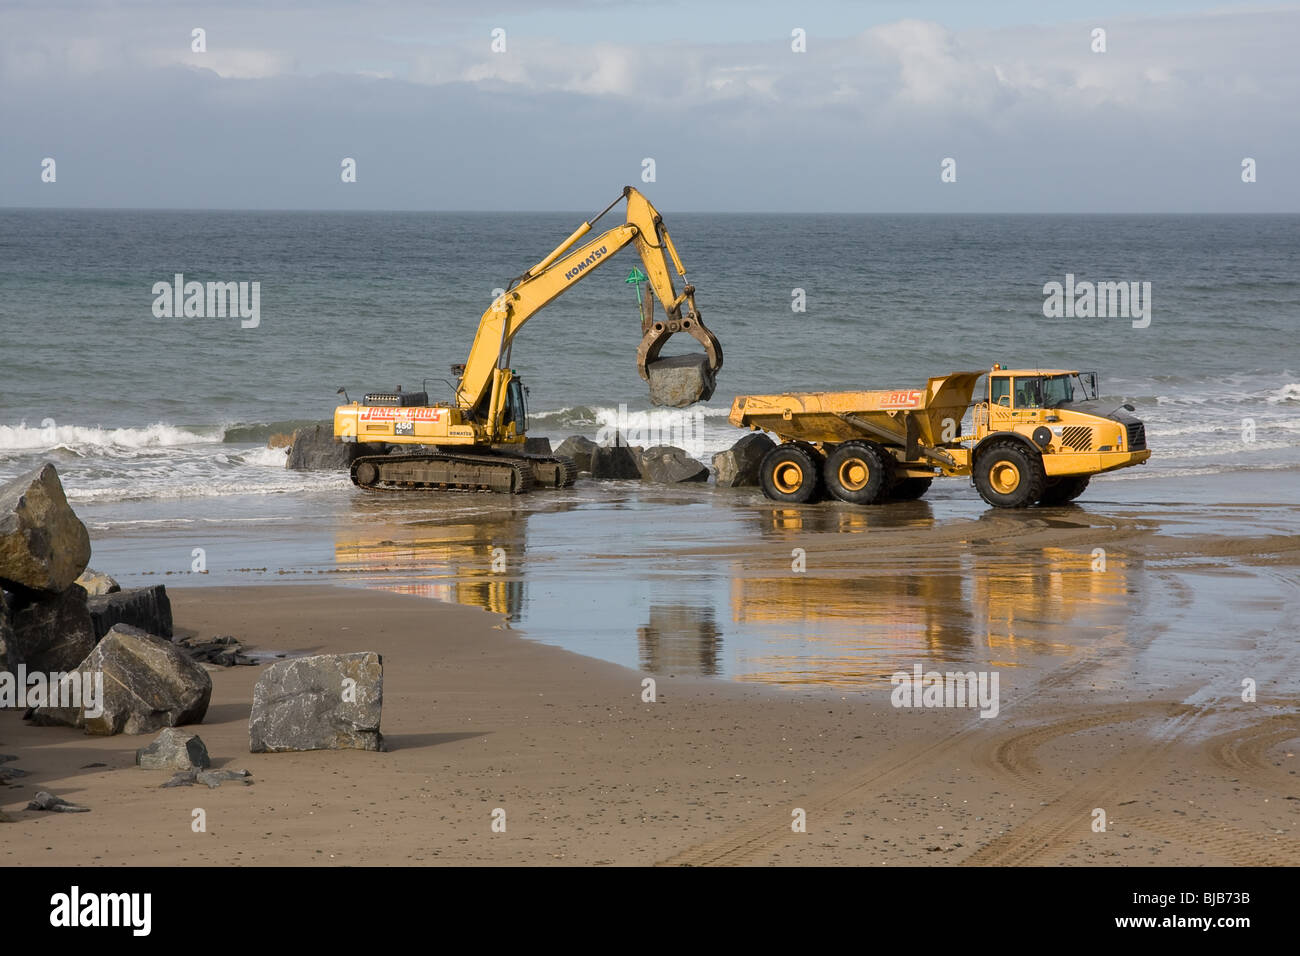 Moving boulders on the beach, tywyn Stock Photo